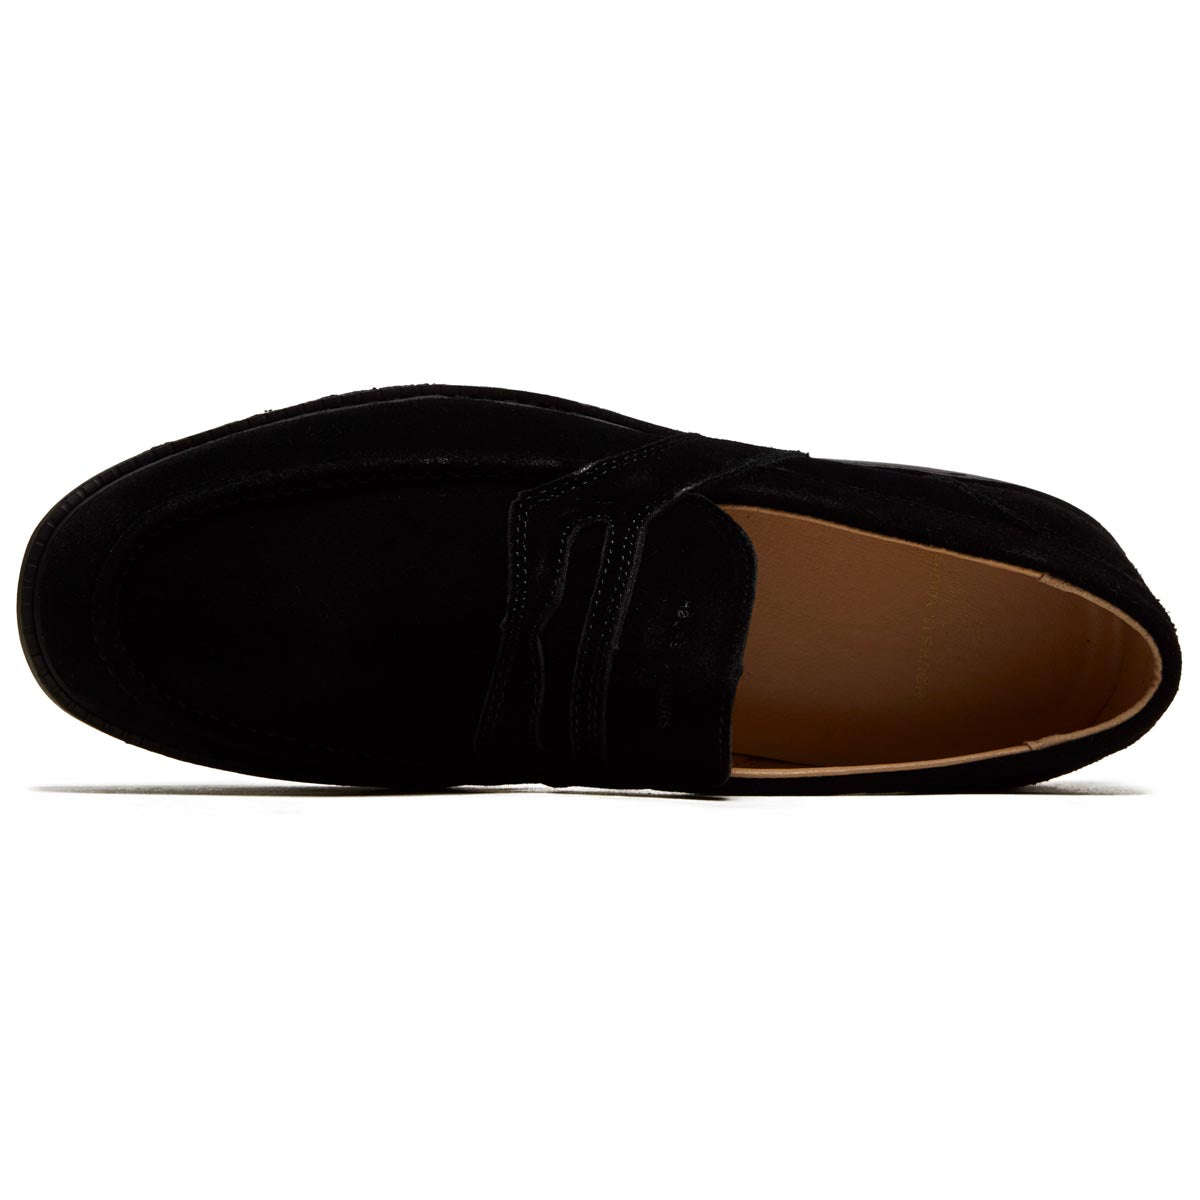 Hours Is Yours Cohiba Penny Loafer Shoes - Black Suede image 3